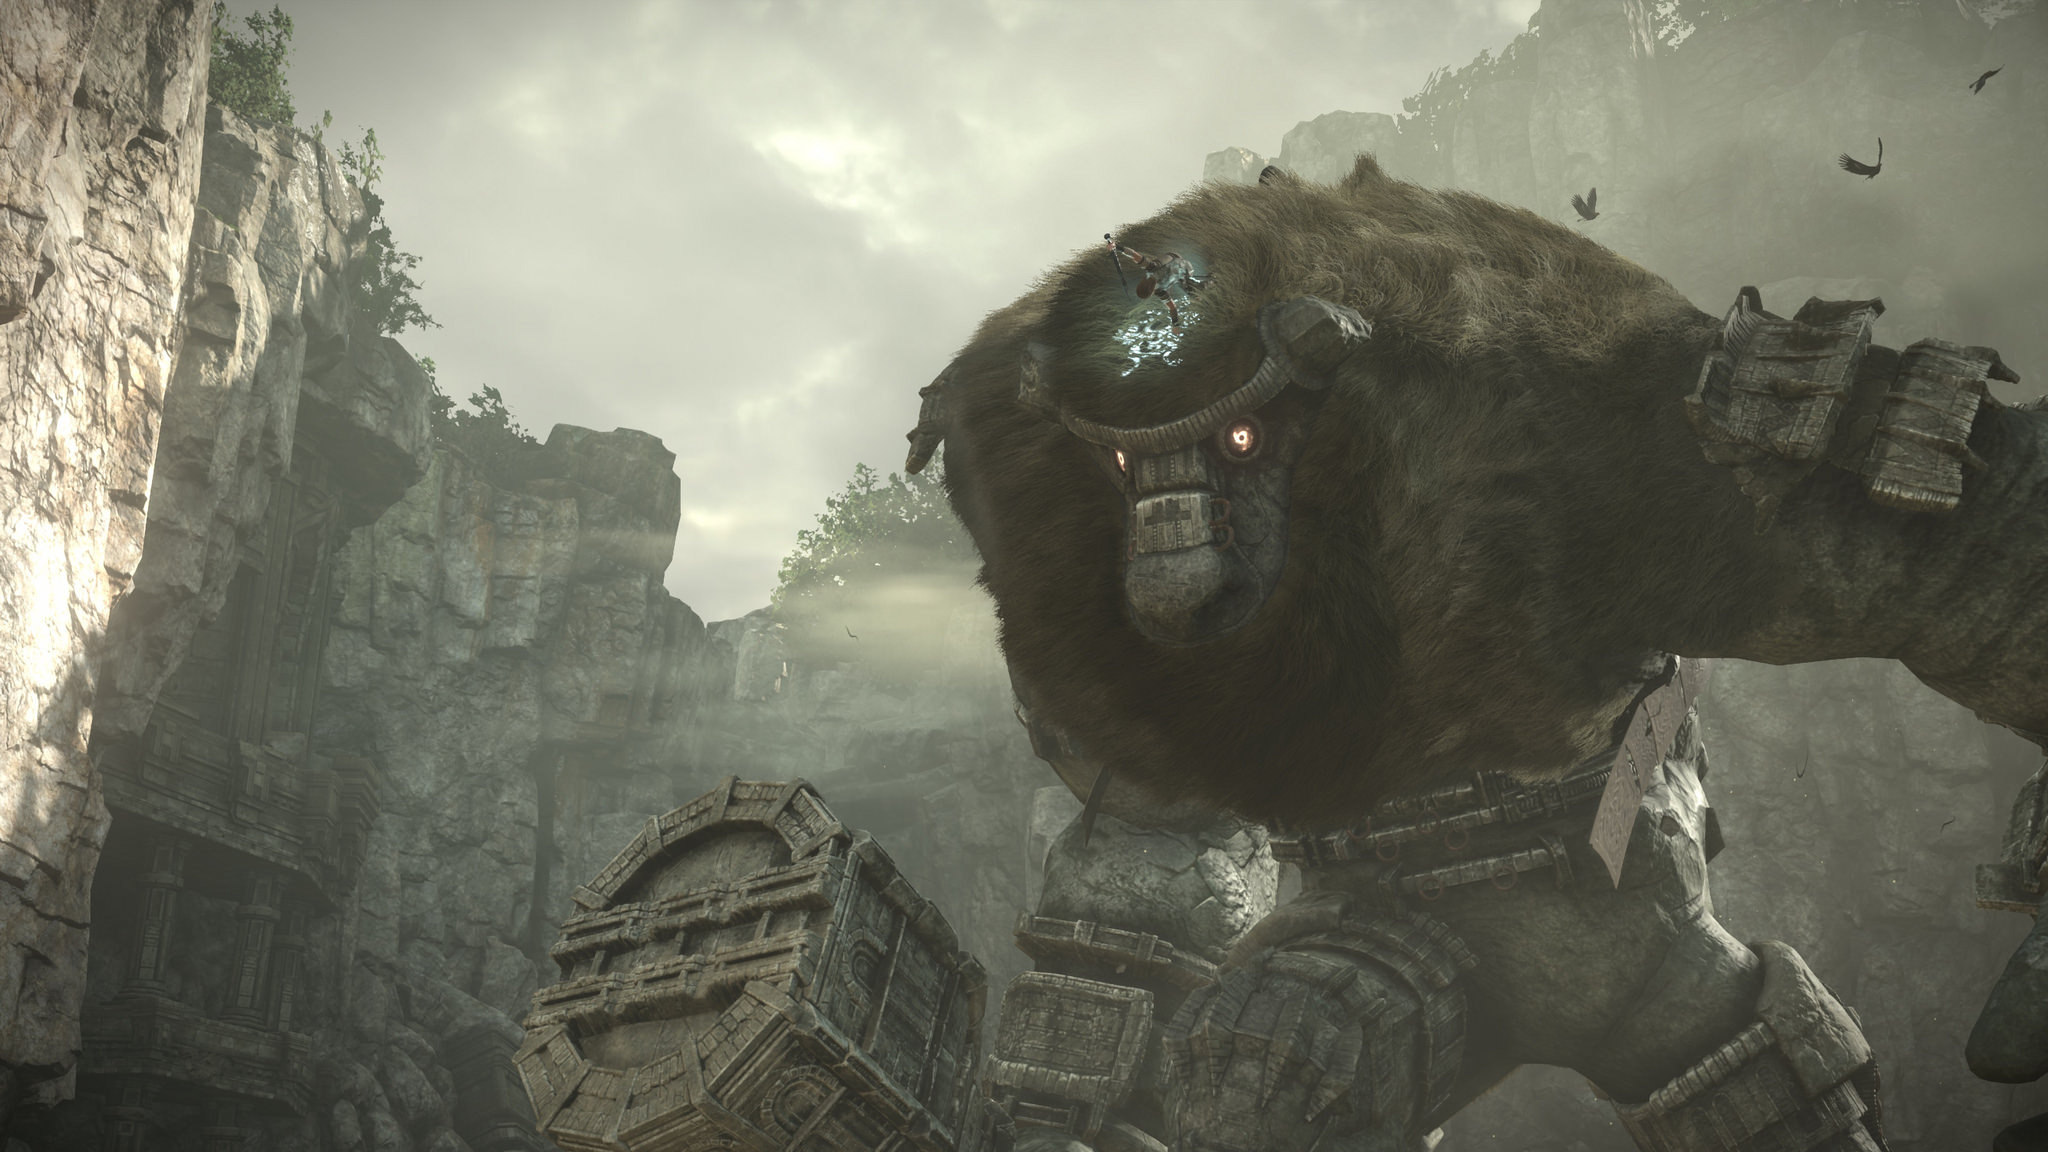 shadow of the colossus playstation store